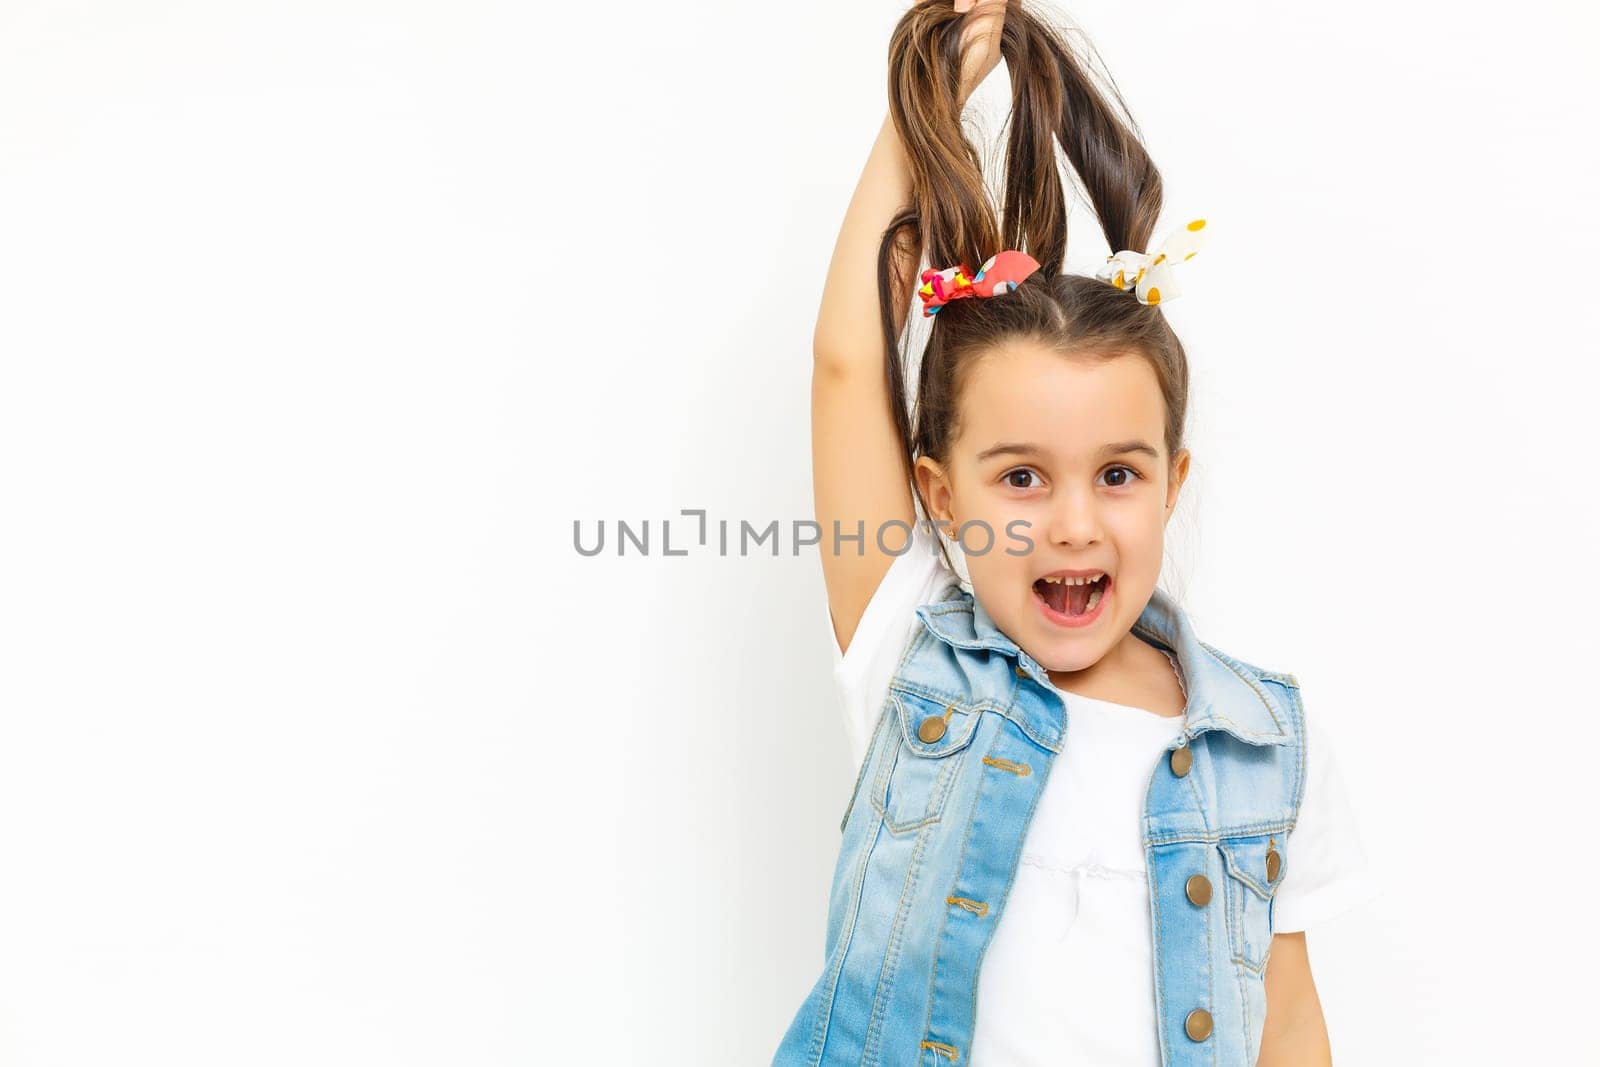 Hair care concept with portrait of little girl holds hair isolated on white